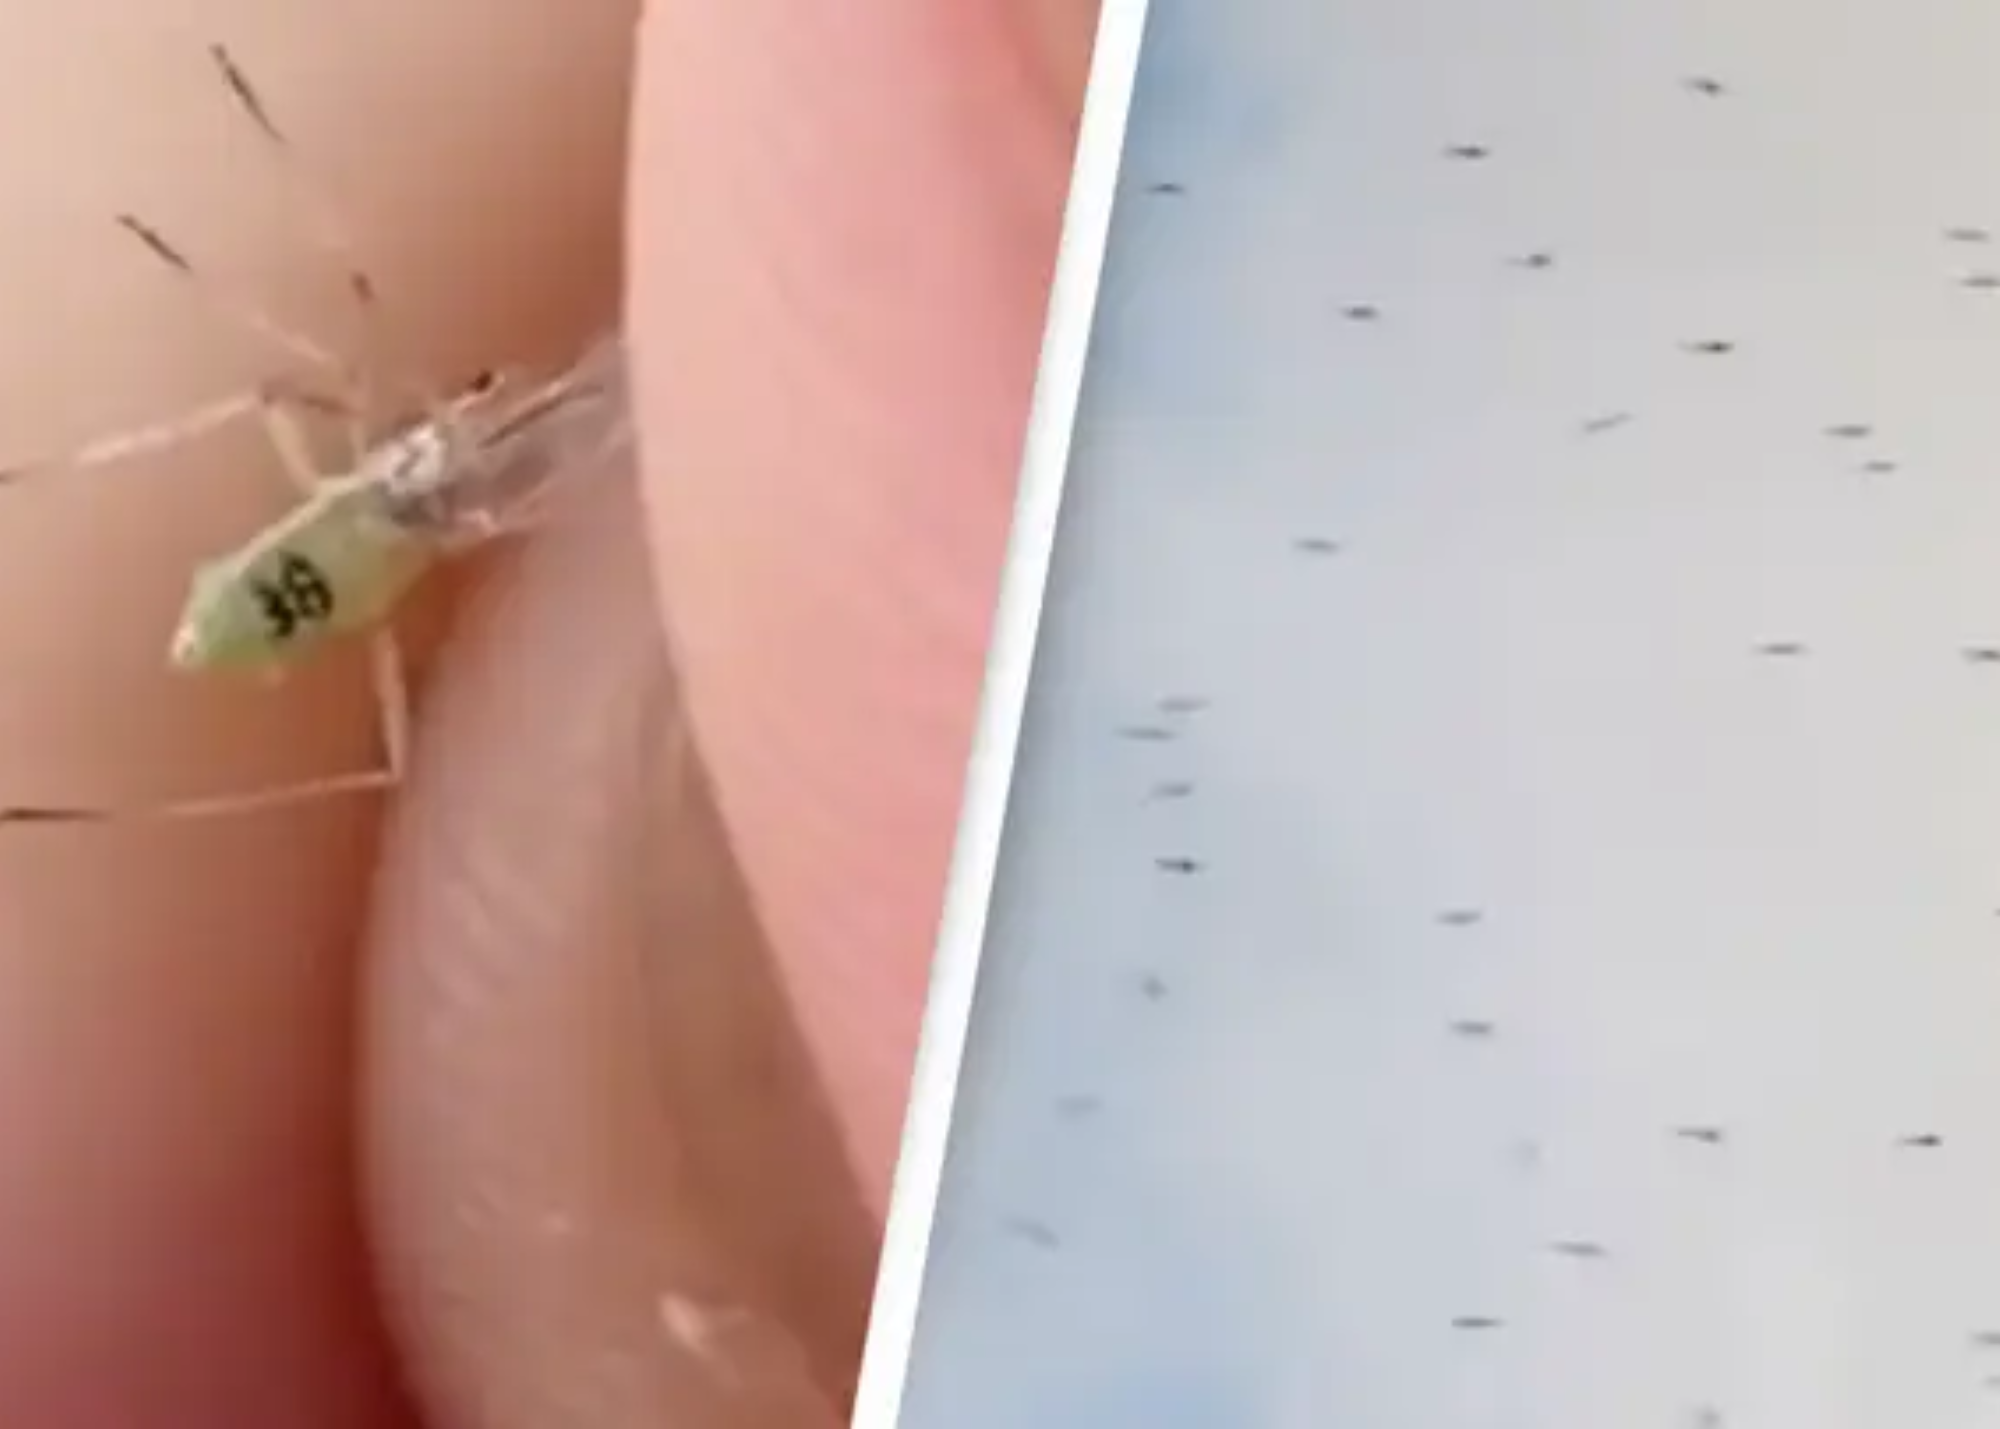 Conspiracy Theorists Say Governments Make Mosquitoes To Spy On Humans